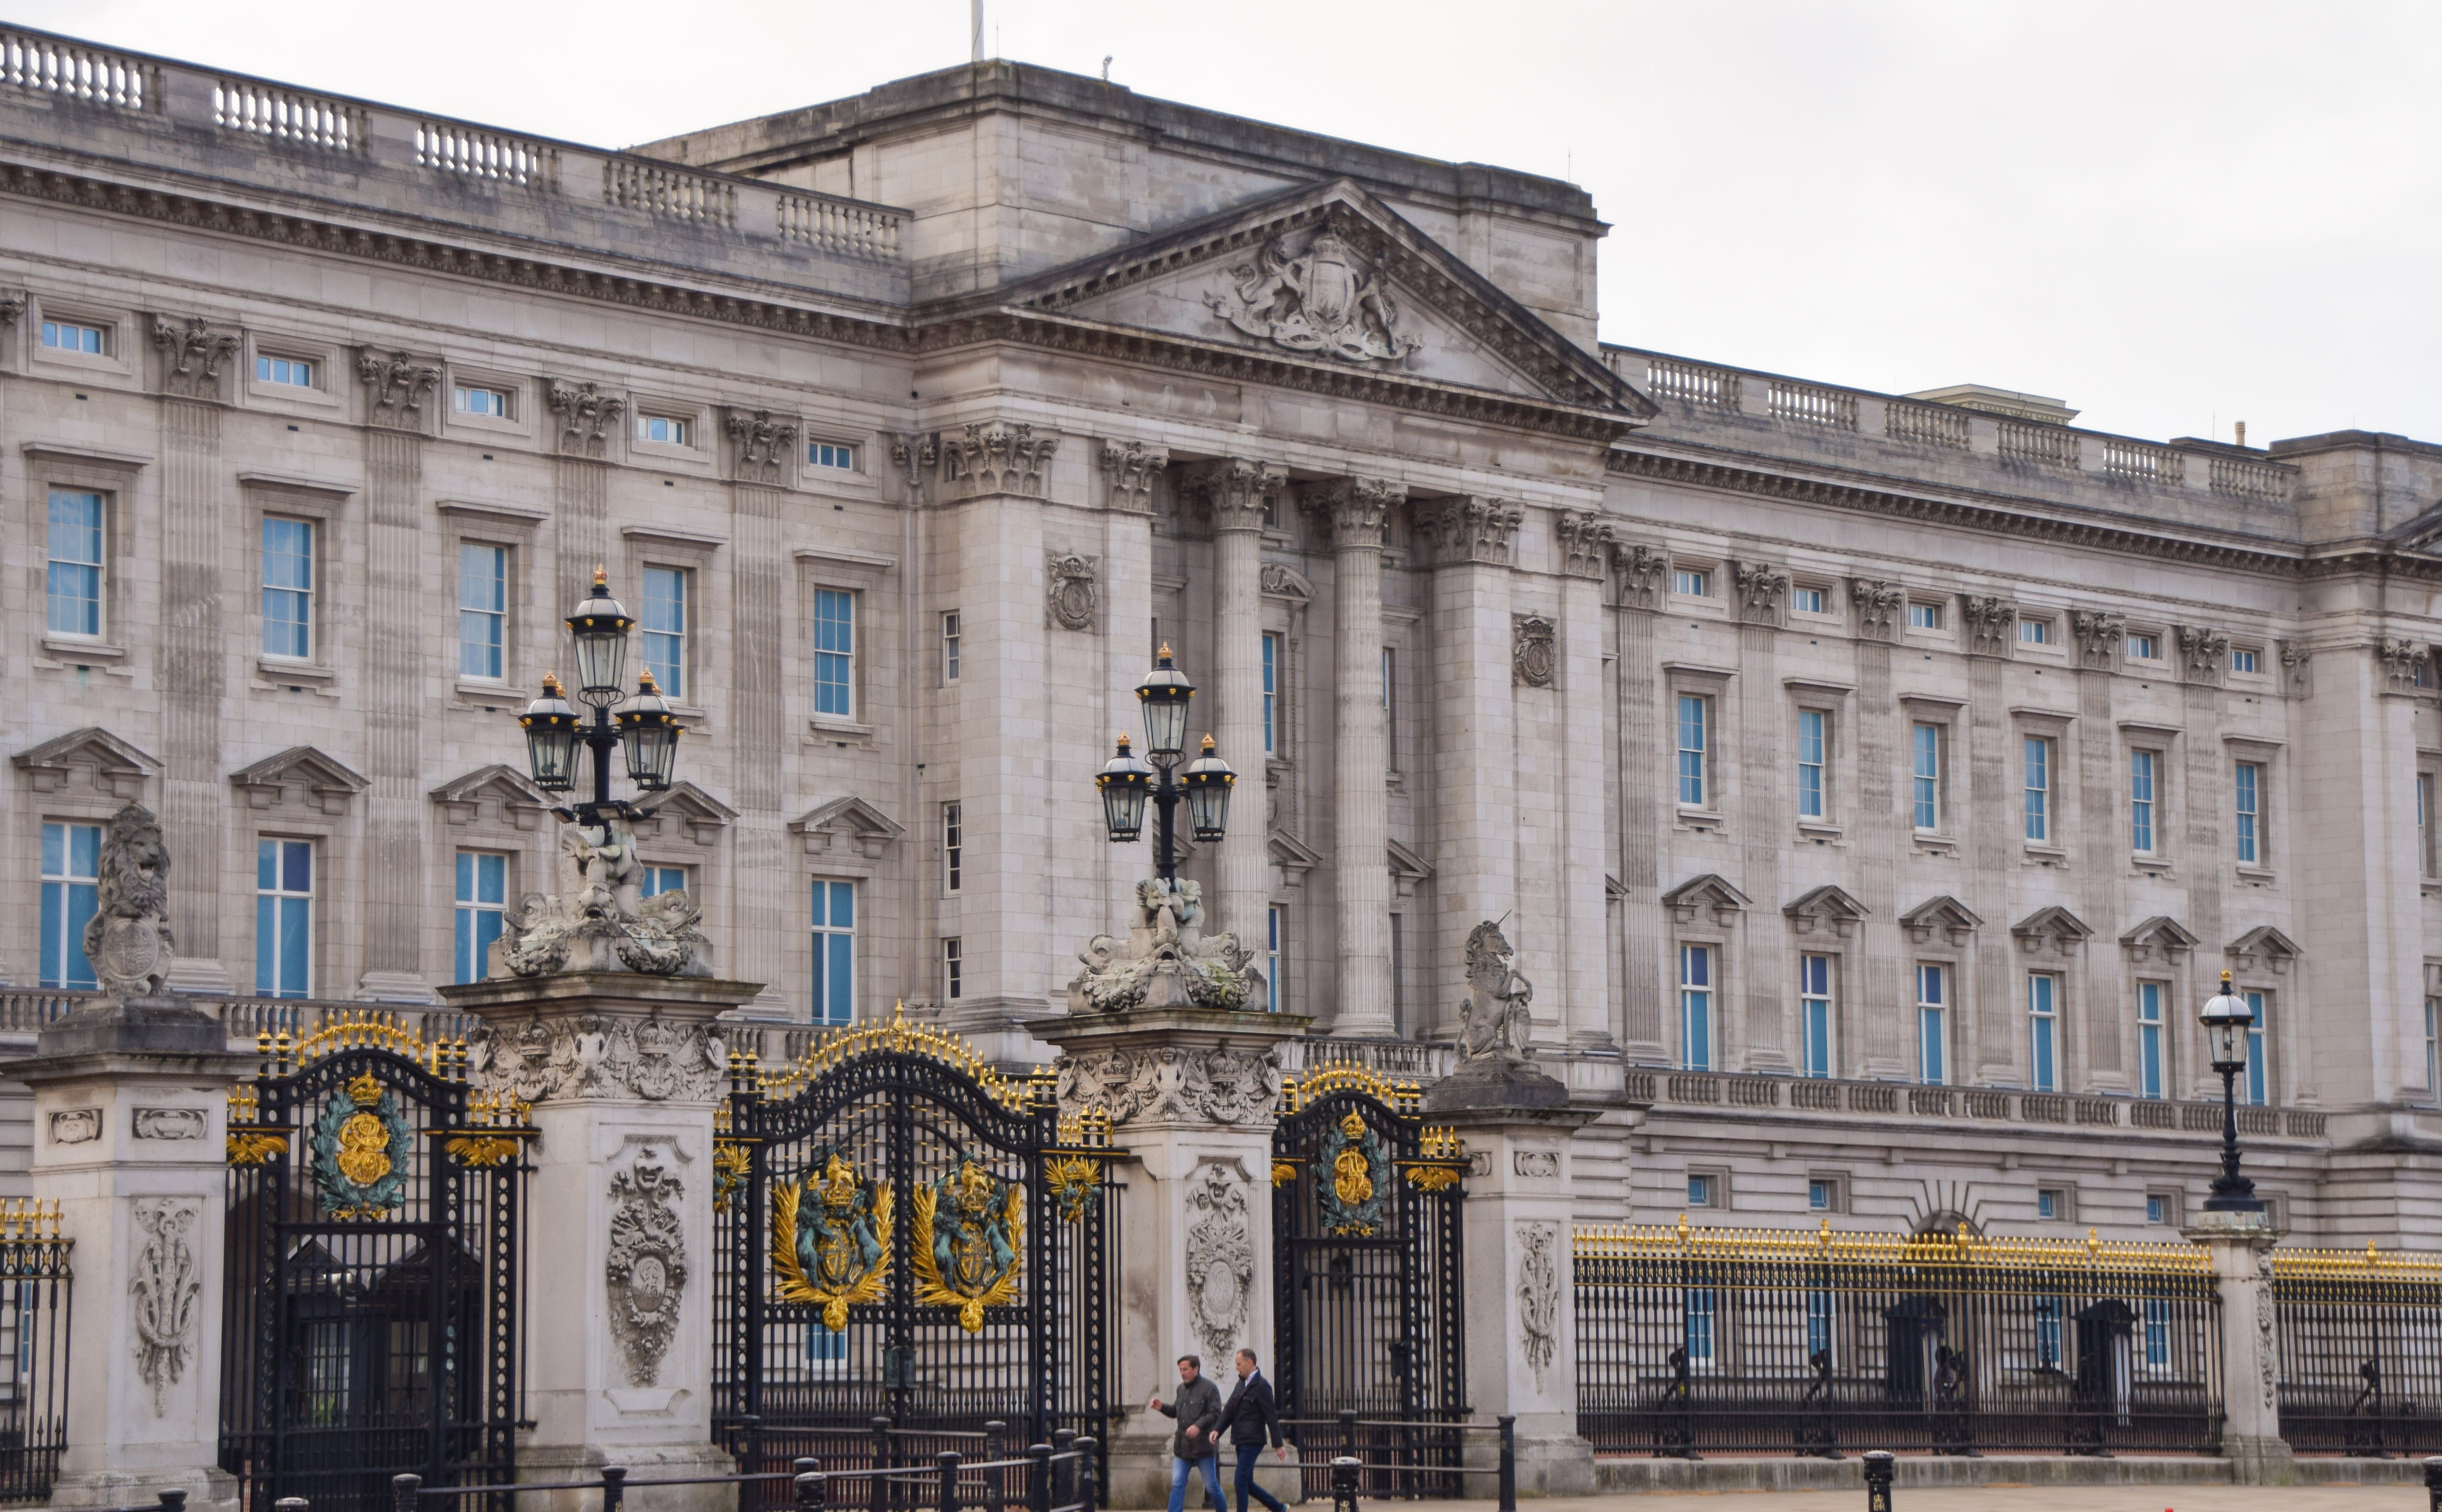  A photograph of an exterior view of Buckingham Palace in London. / Source: Getty Images